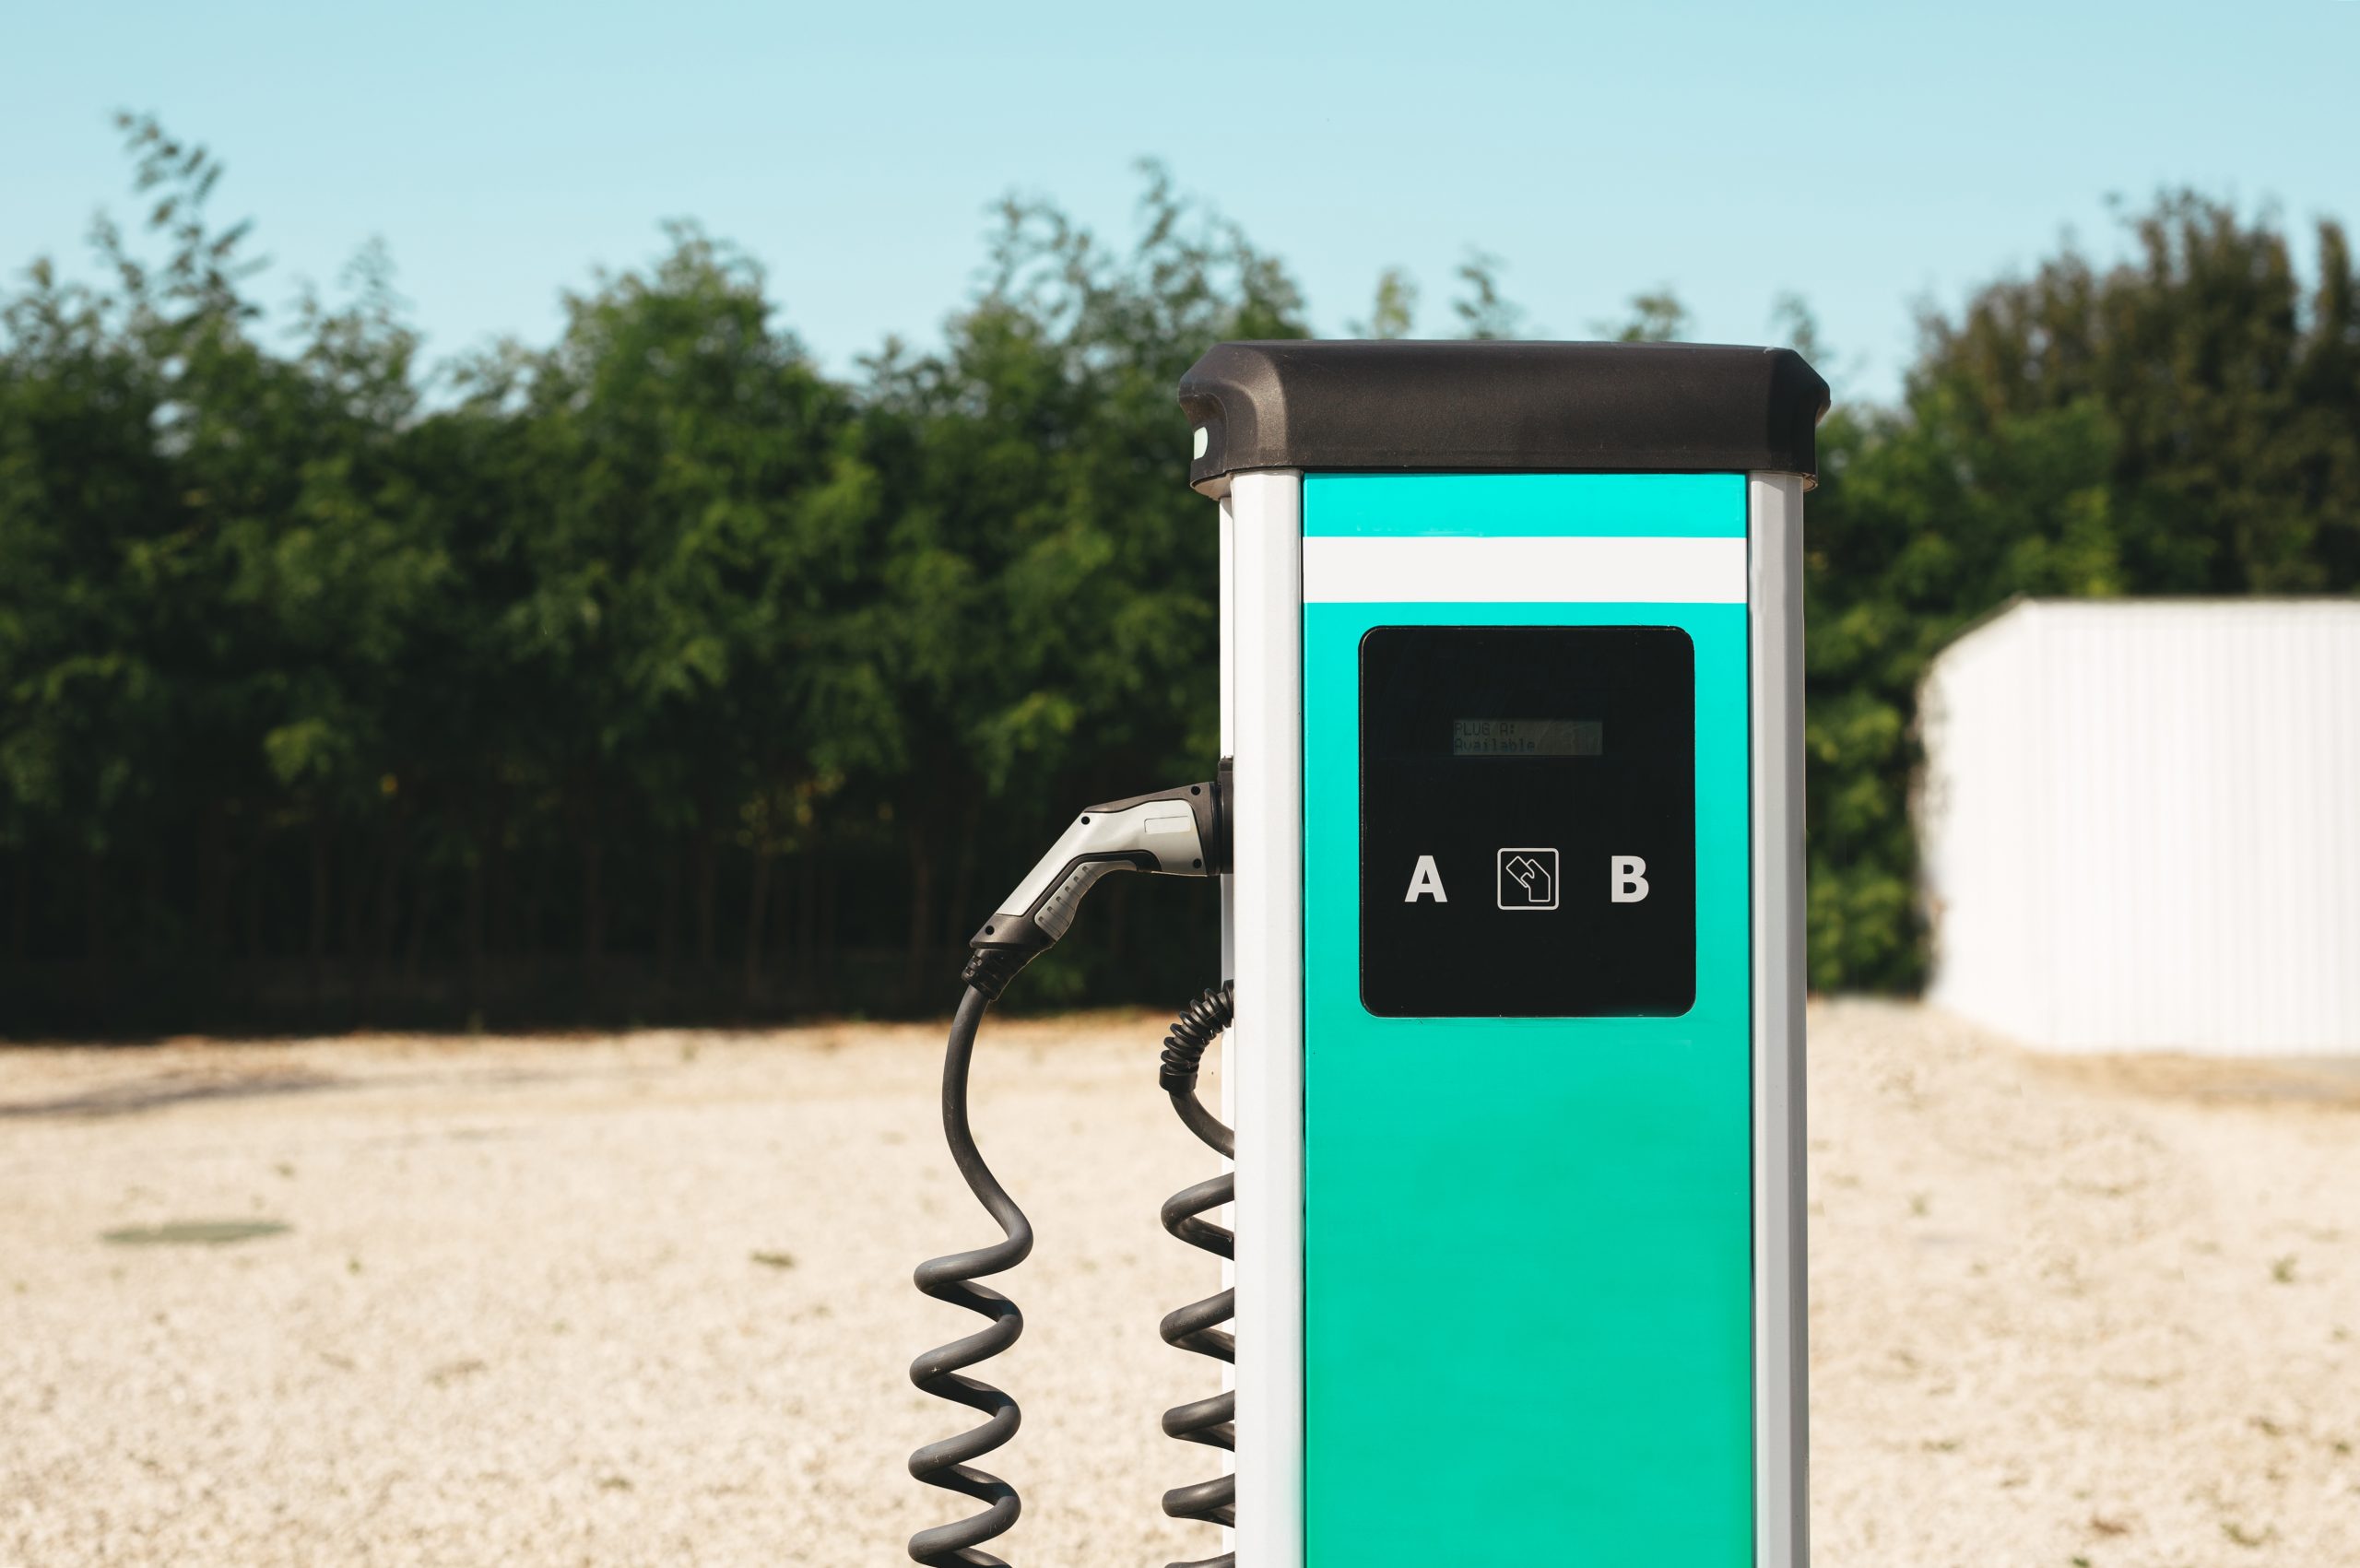 Qatar: First EV charger plant in region to begin production in Q3 of 2022